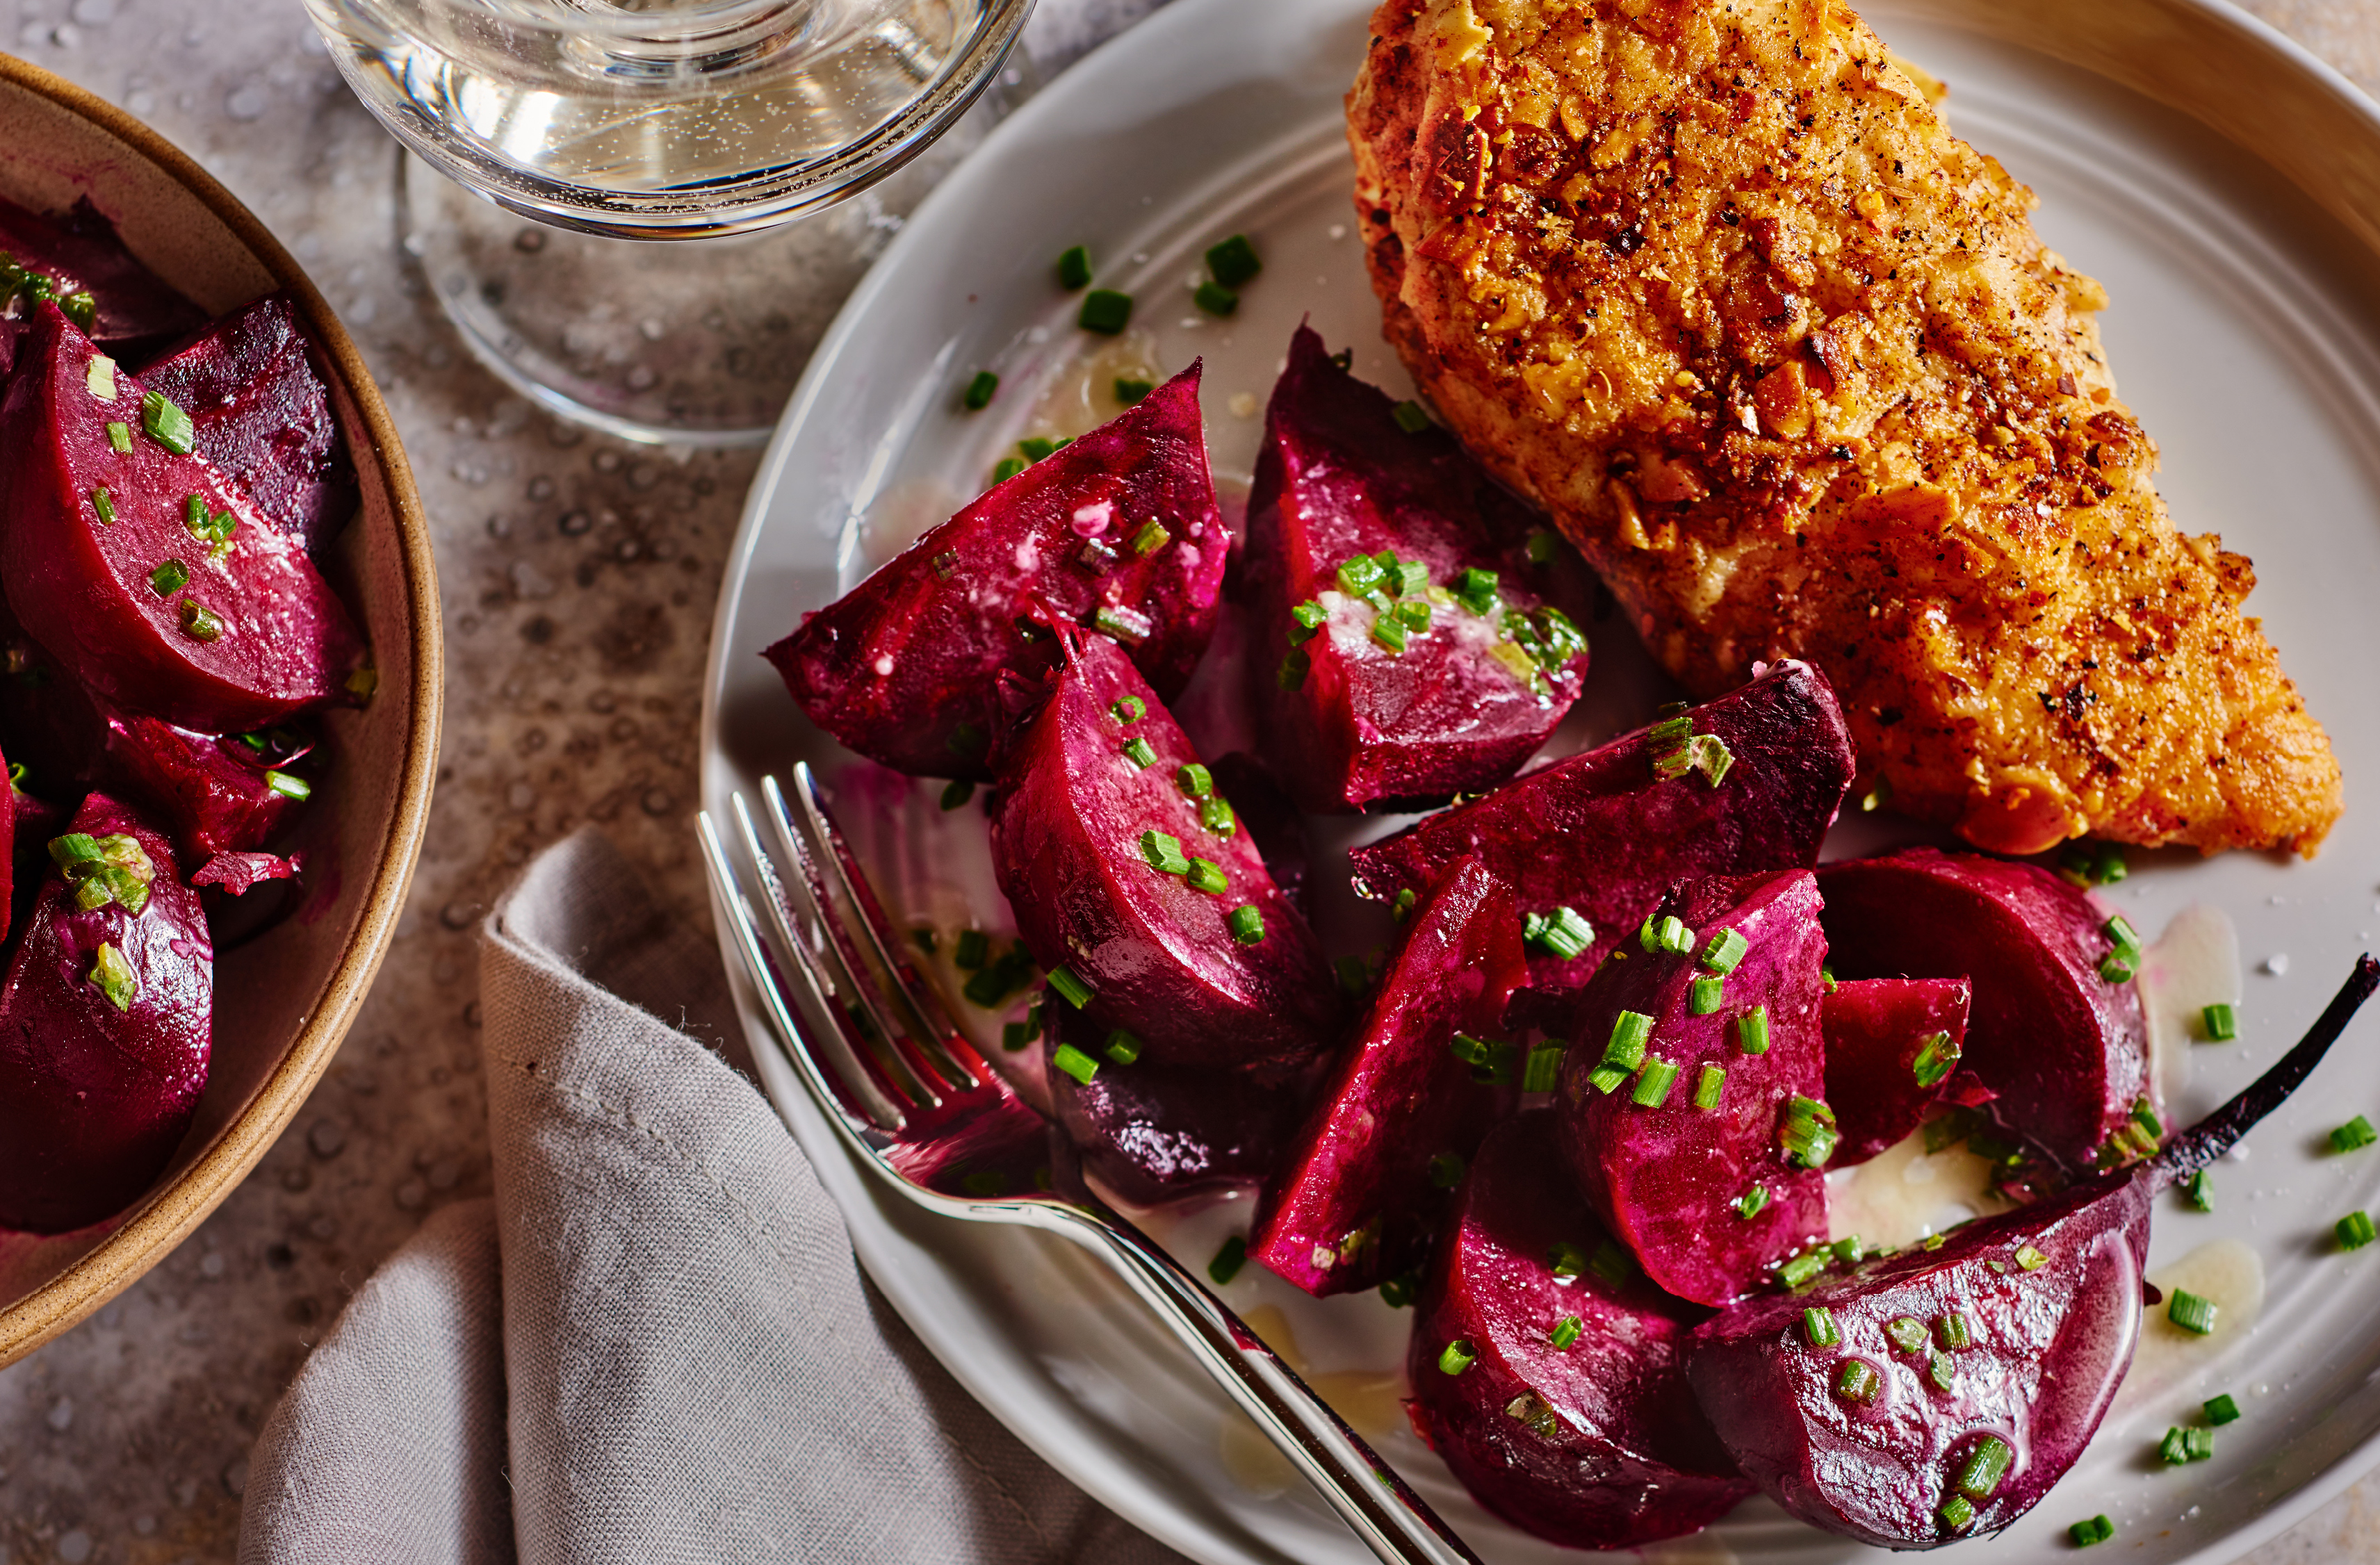 Roasted beets with garlic chive tarragon spread with fried chicken
